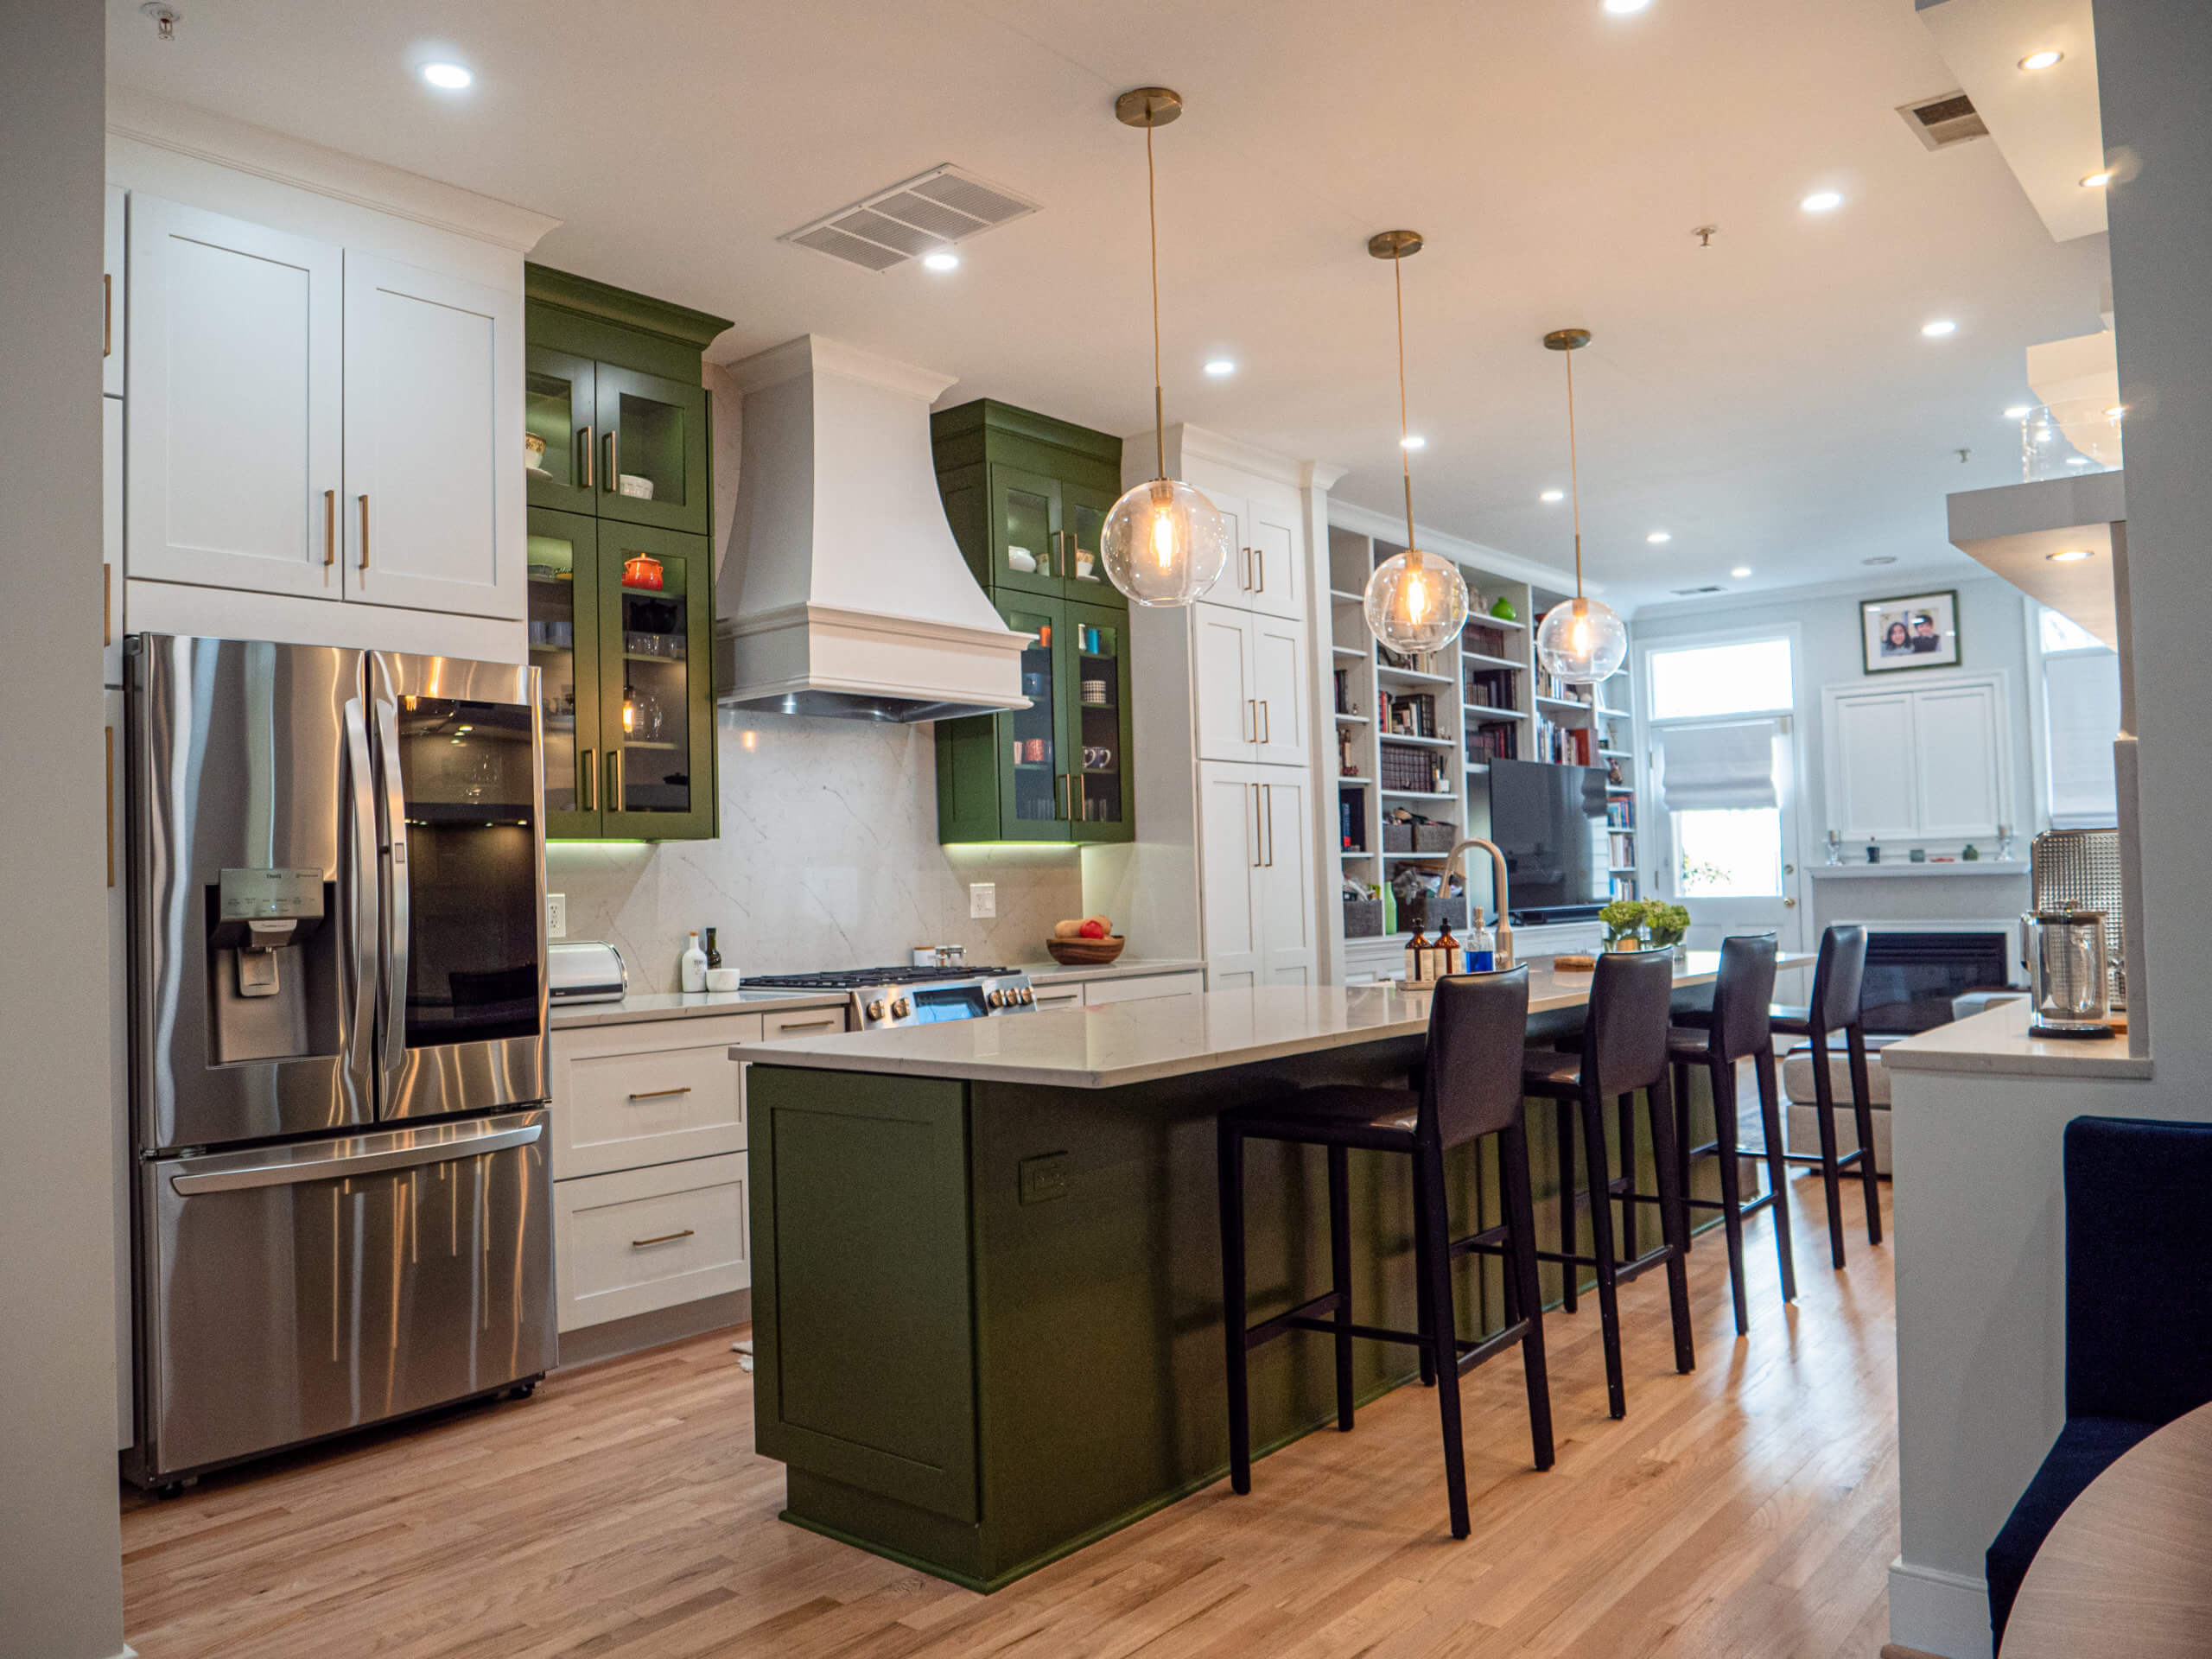 Completed kitchen renovation service. Modern kitchen with green cabinetry and large island